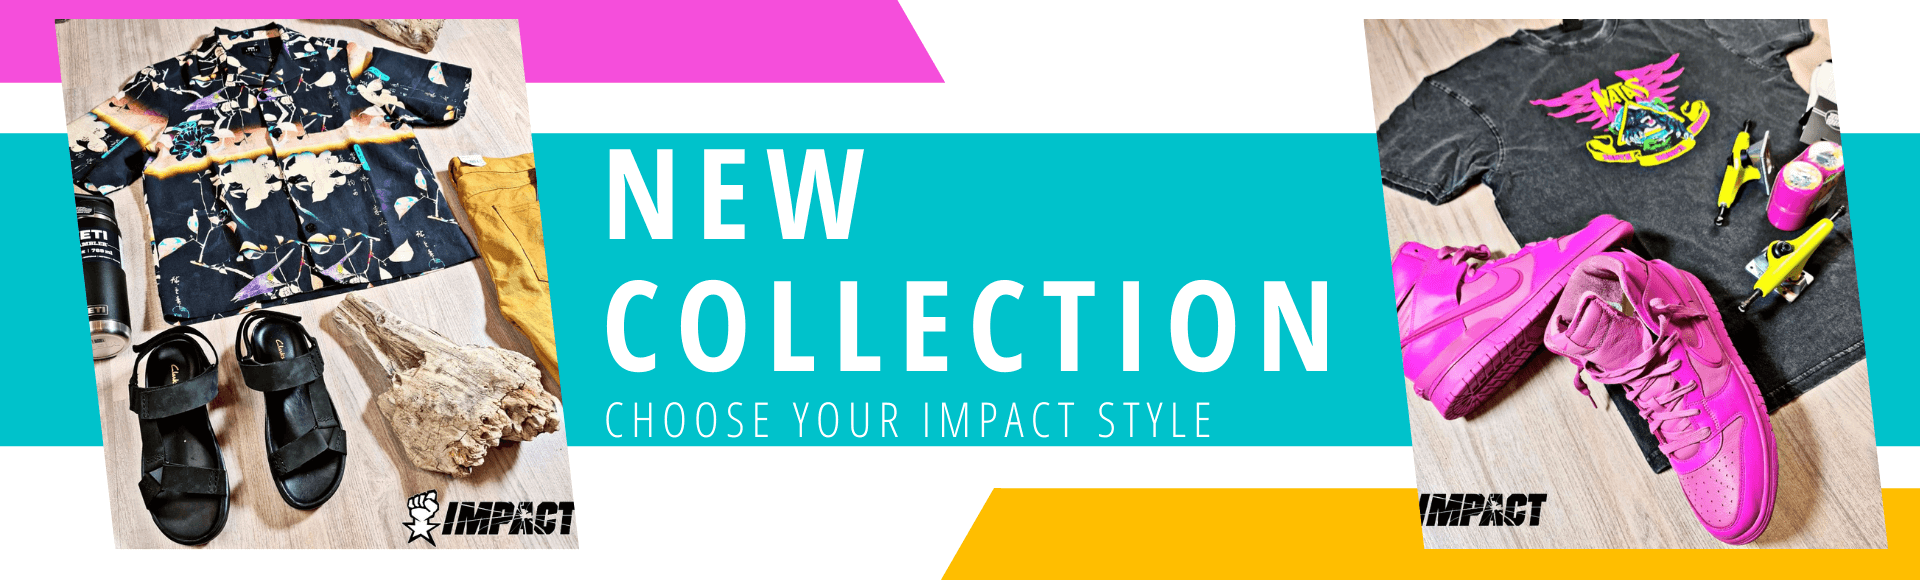 Apparel New Collection | Impact Surf Shop